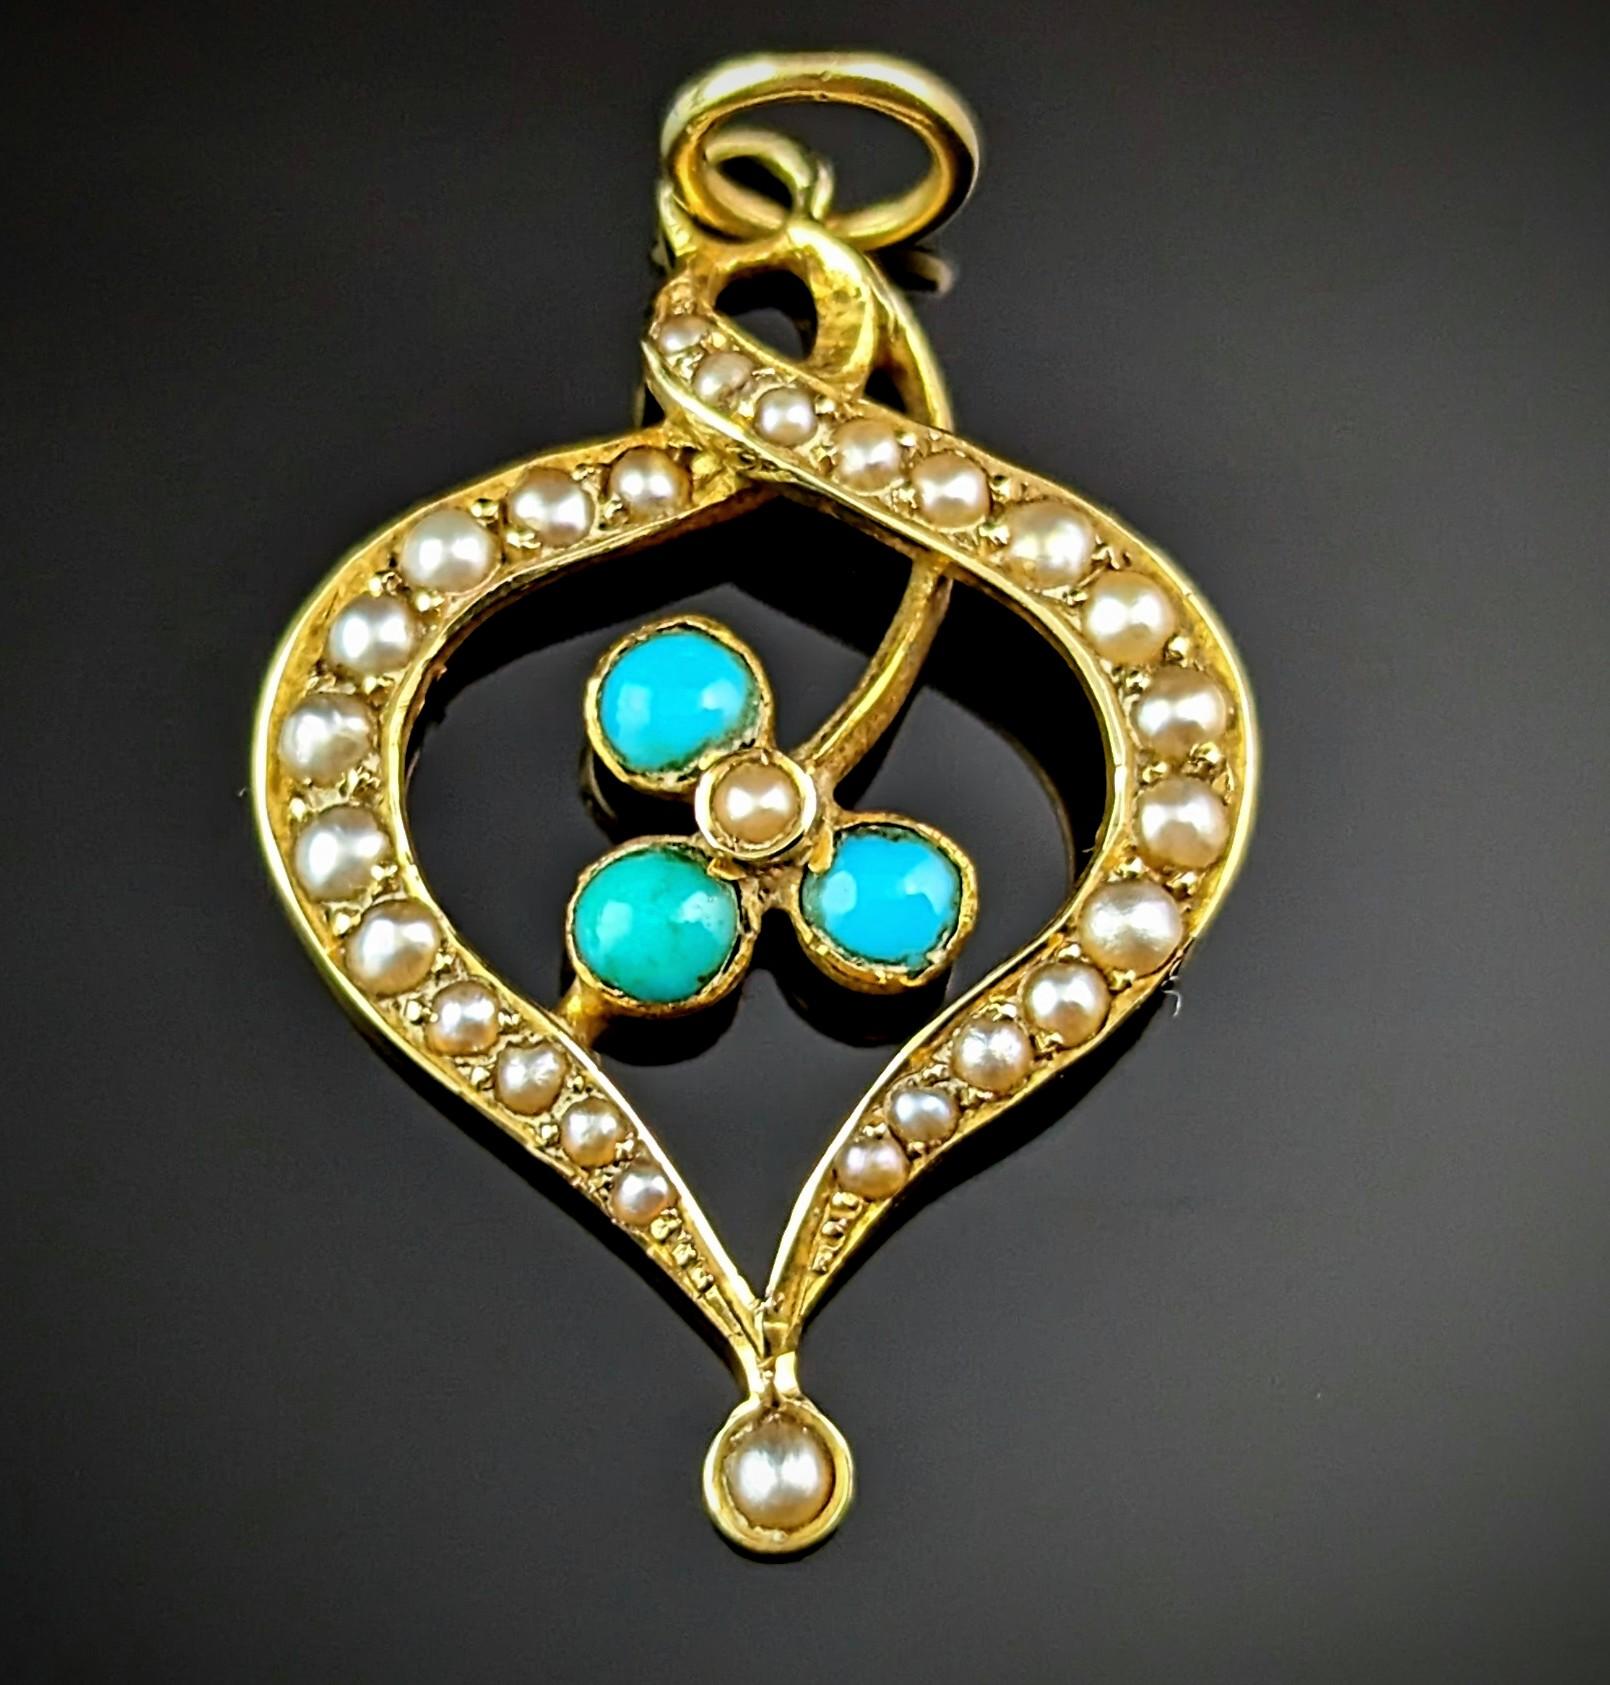 This sweet and dainty pendant is the perfect choice for a fine antique gold chain.

It is a delightful little piece with scrolling shapes in openwork 15ct yellow gold with a shamrock design to the centre.

The shamrock or clover is set with tiny